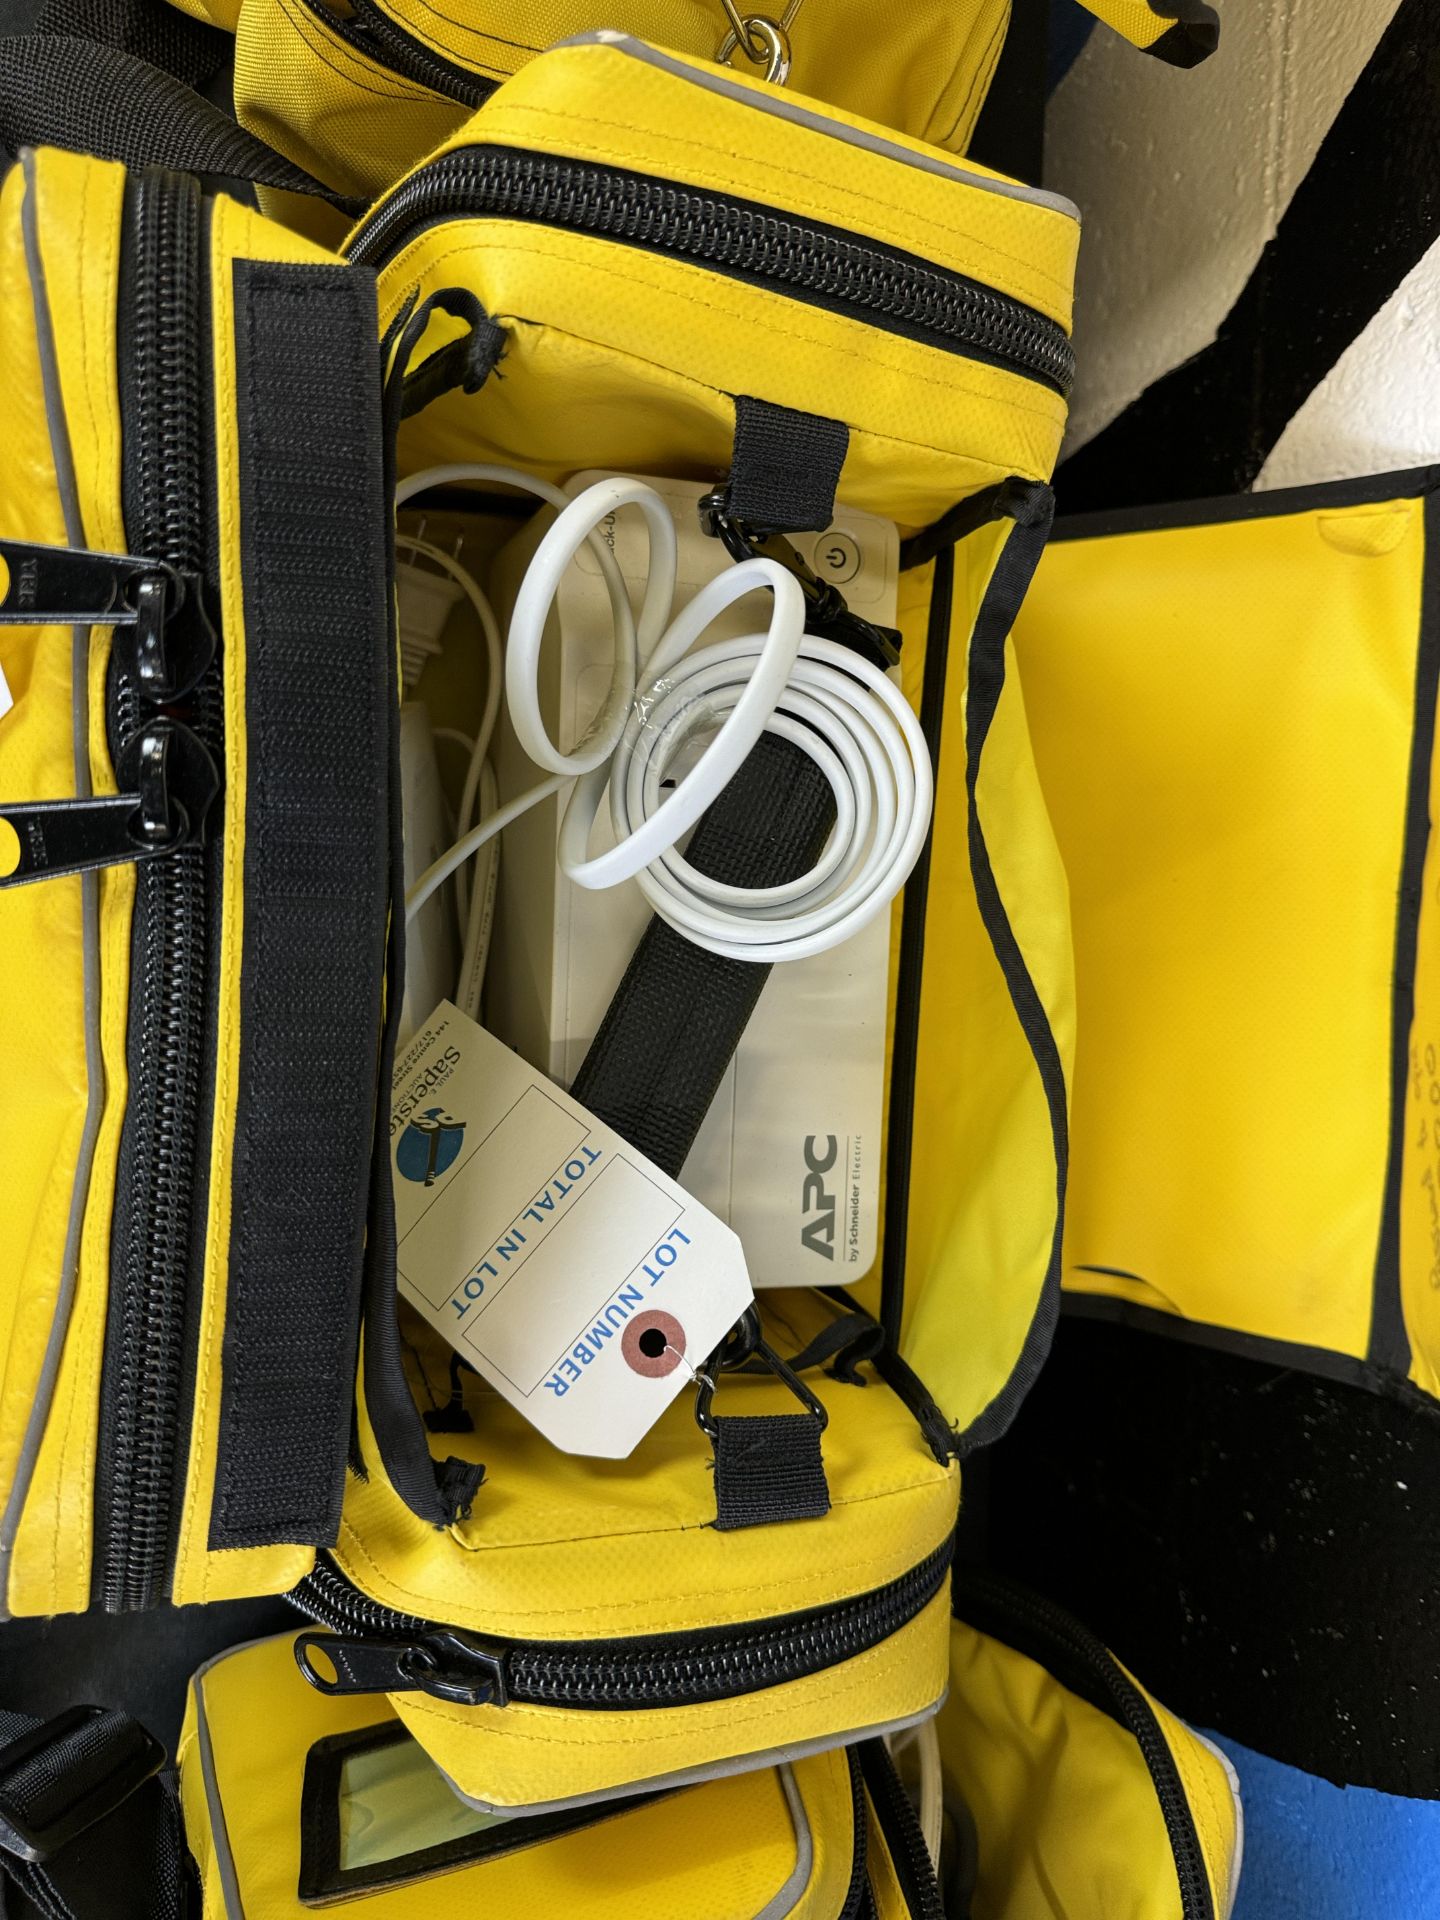 (Lot) Advanced Life Support EMT Training Kits C/O: 4 Bags, w/ Accessories and 3 iPad - Image 2 of 3